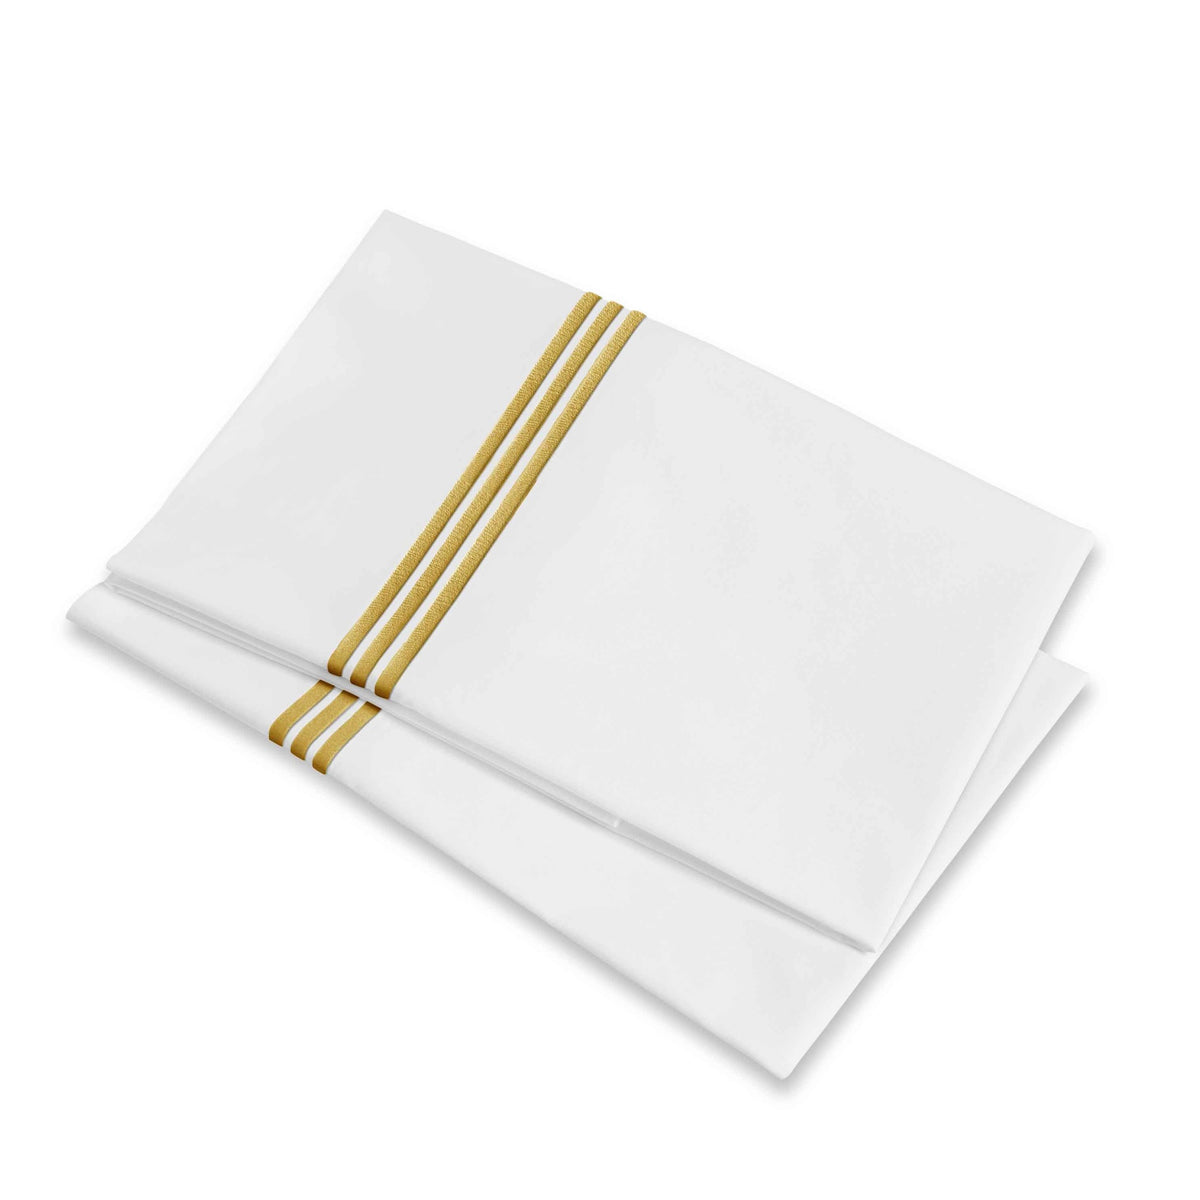 Folded Pillowcases of Signoria Platinum Percale Bedding in White/Gold Color